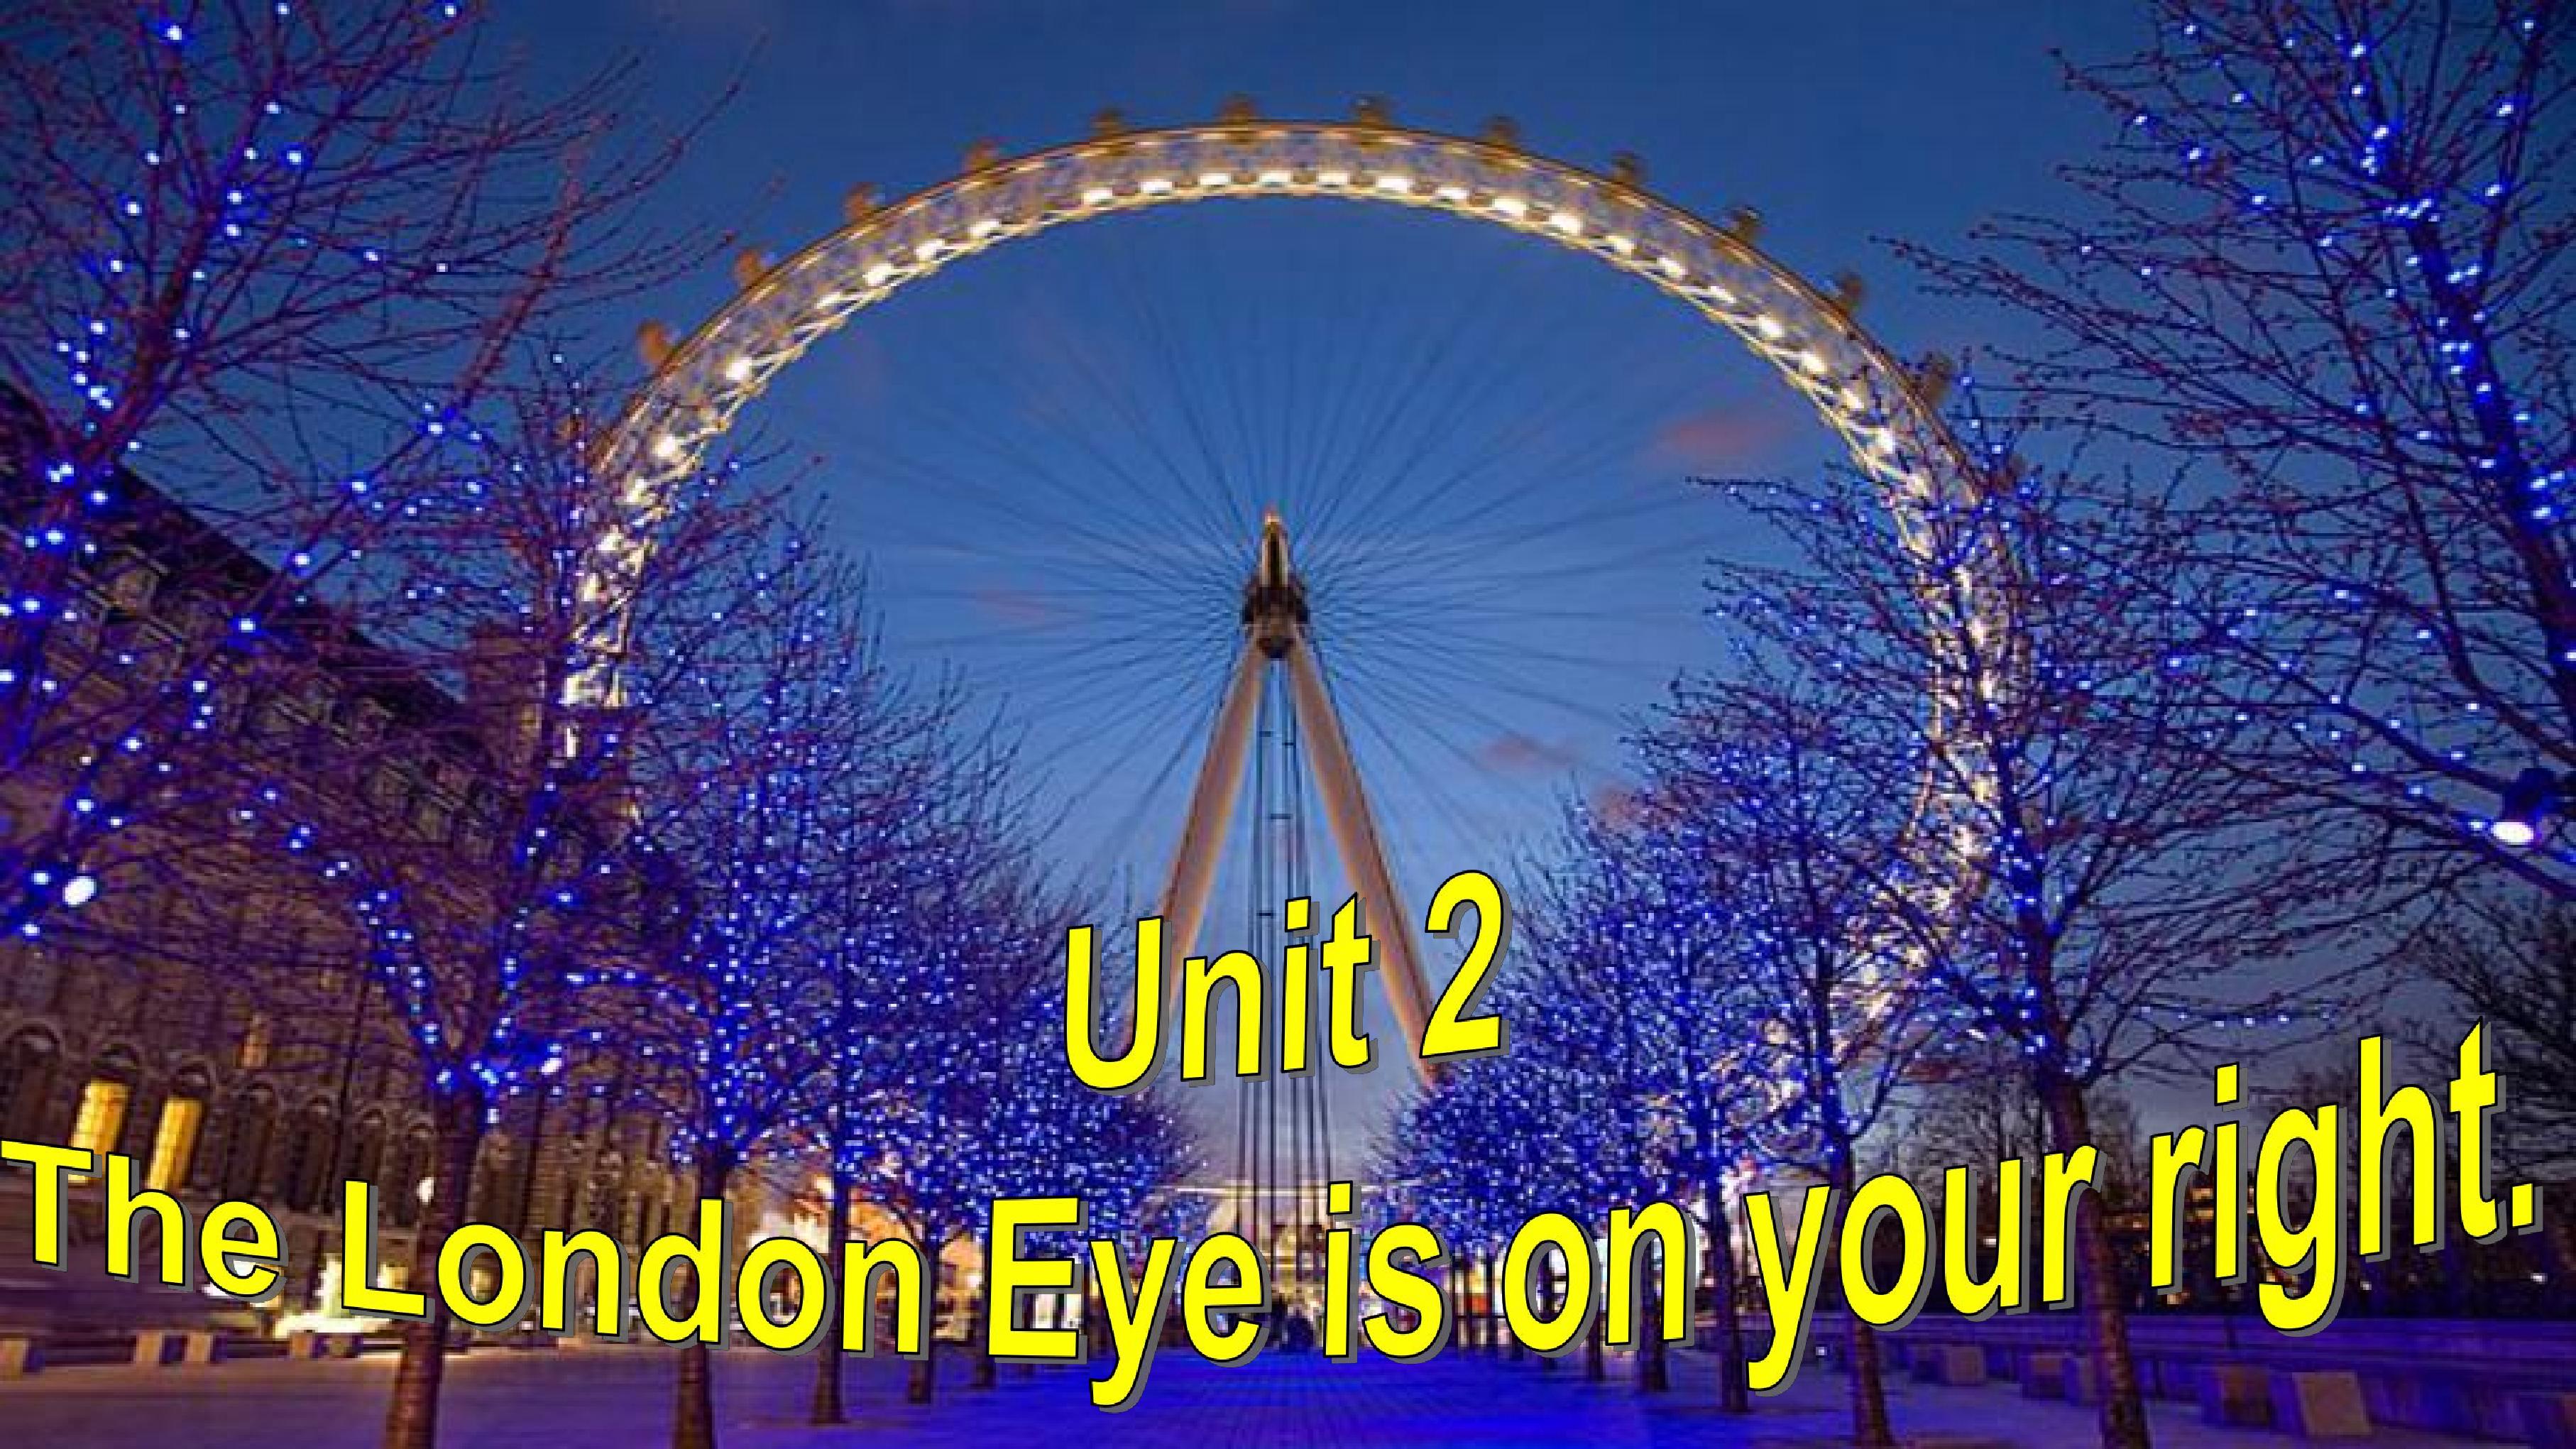 the London Eye is on your right